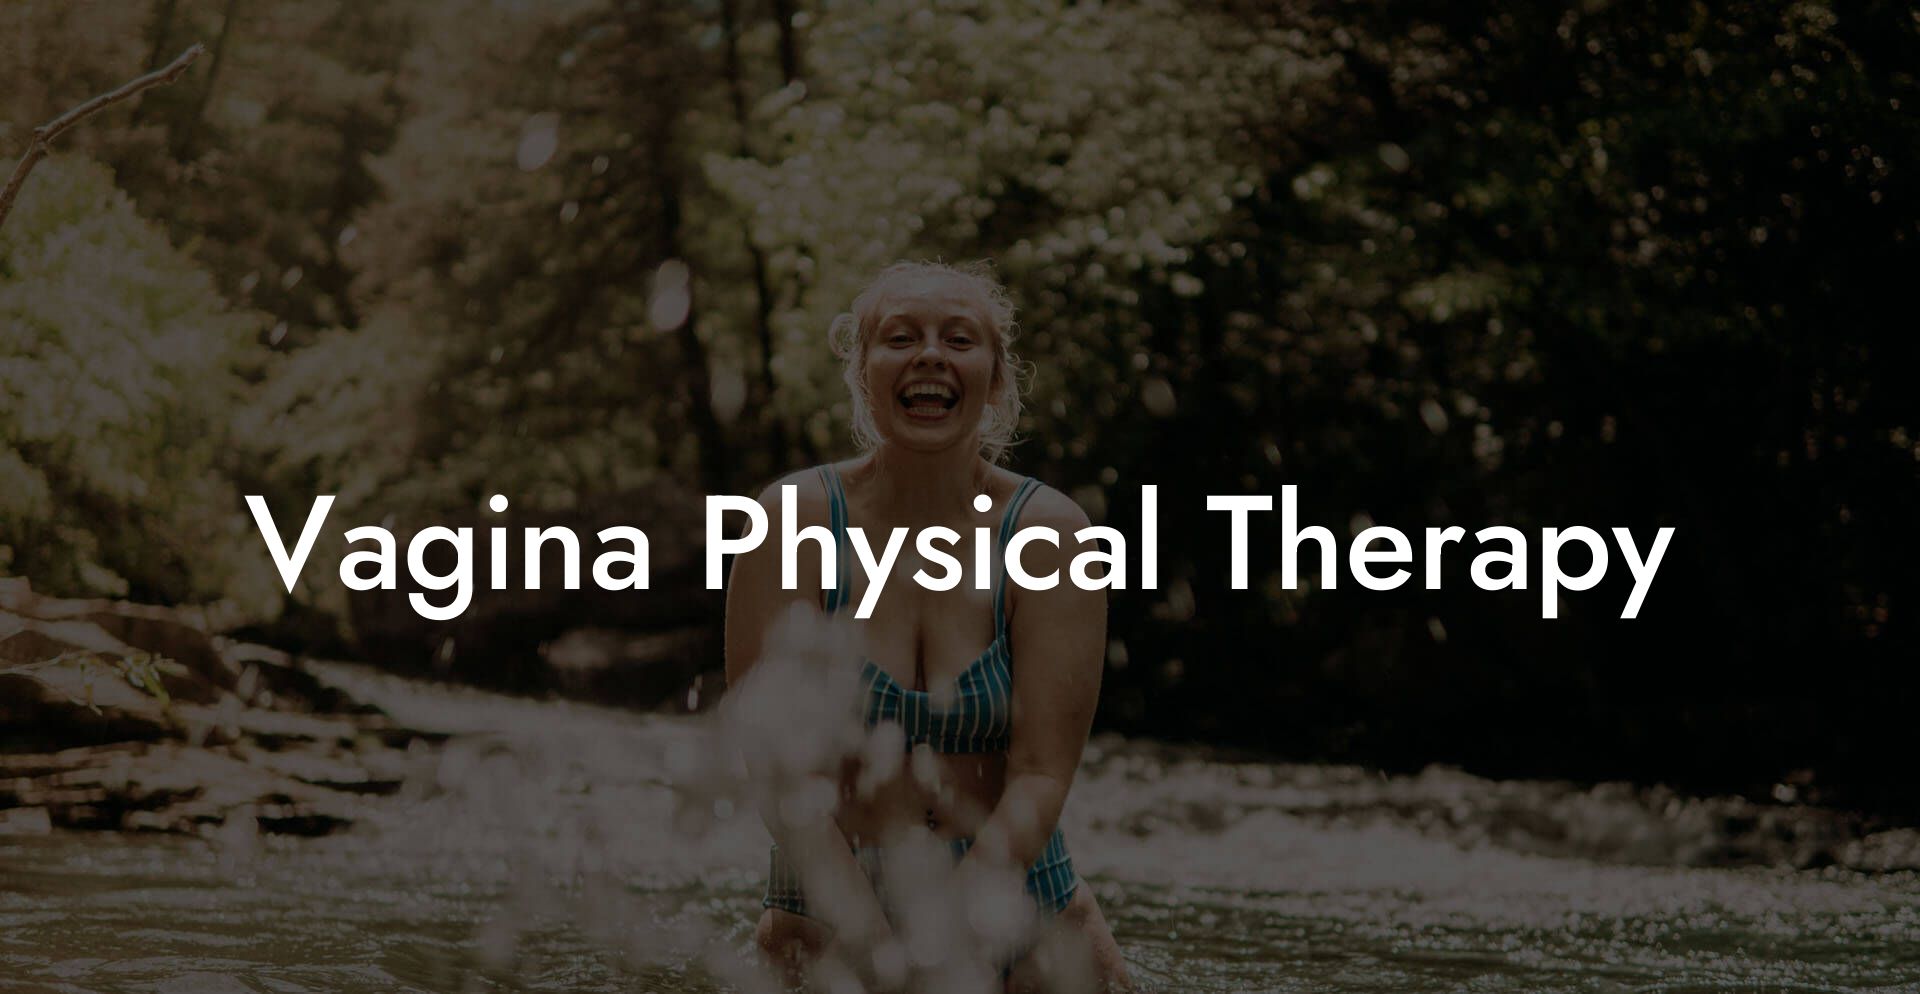 Vagina Physical Therapy